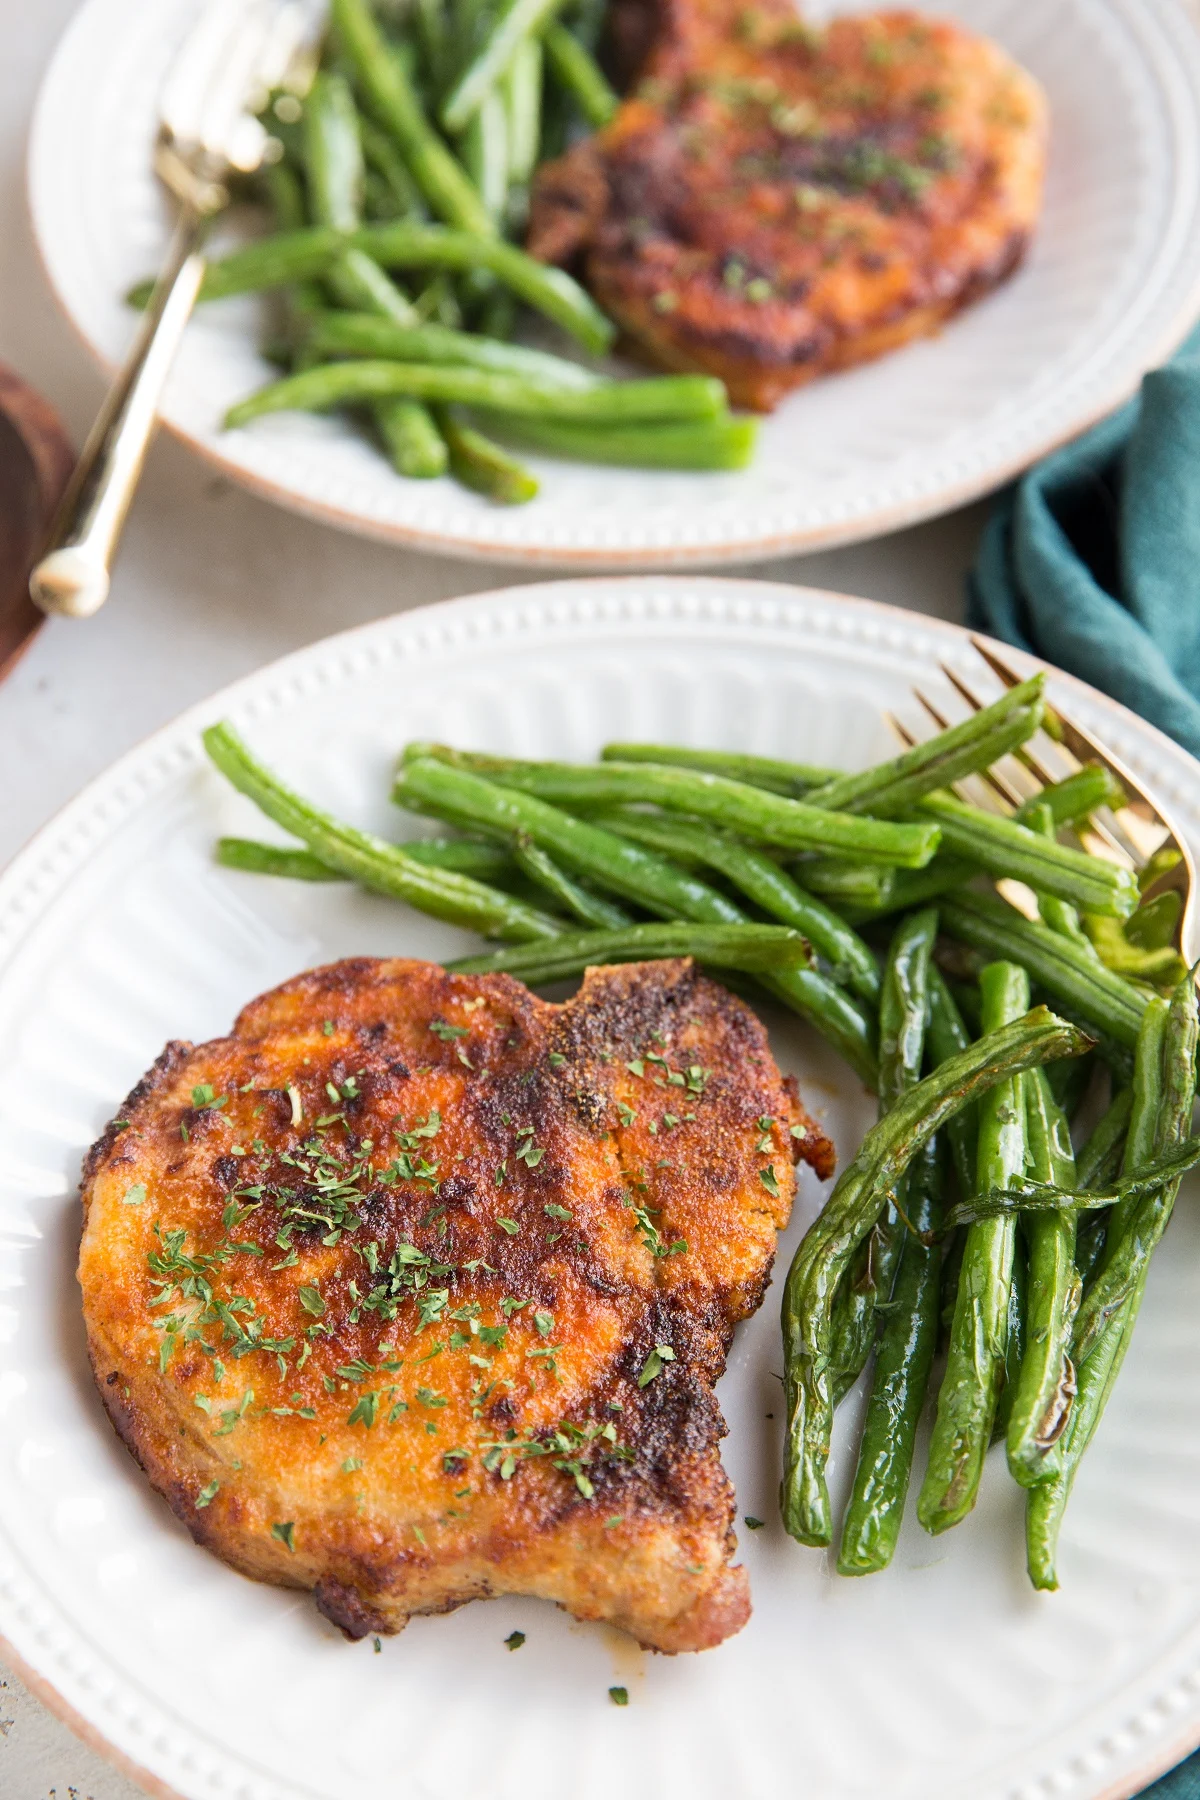 Easy Air Fryer Pork Chops and green beans - a simple, healthful low-carb dinner recipe, ready in a flash!